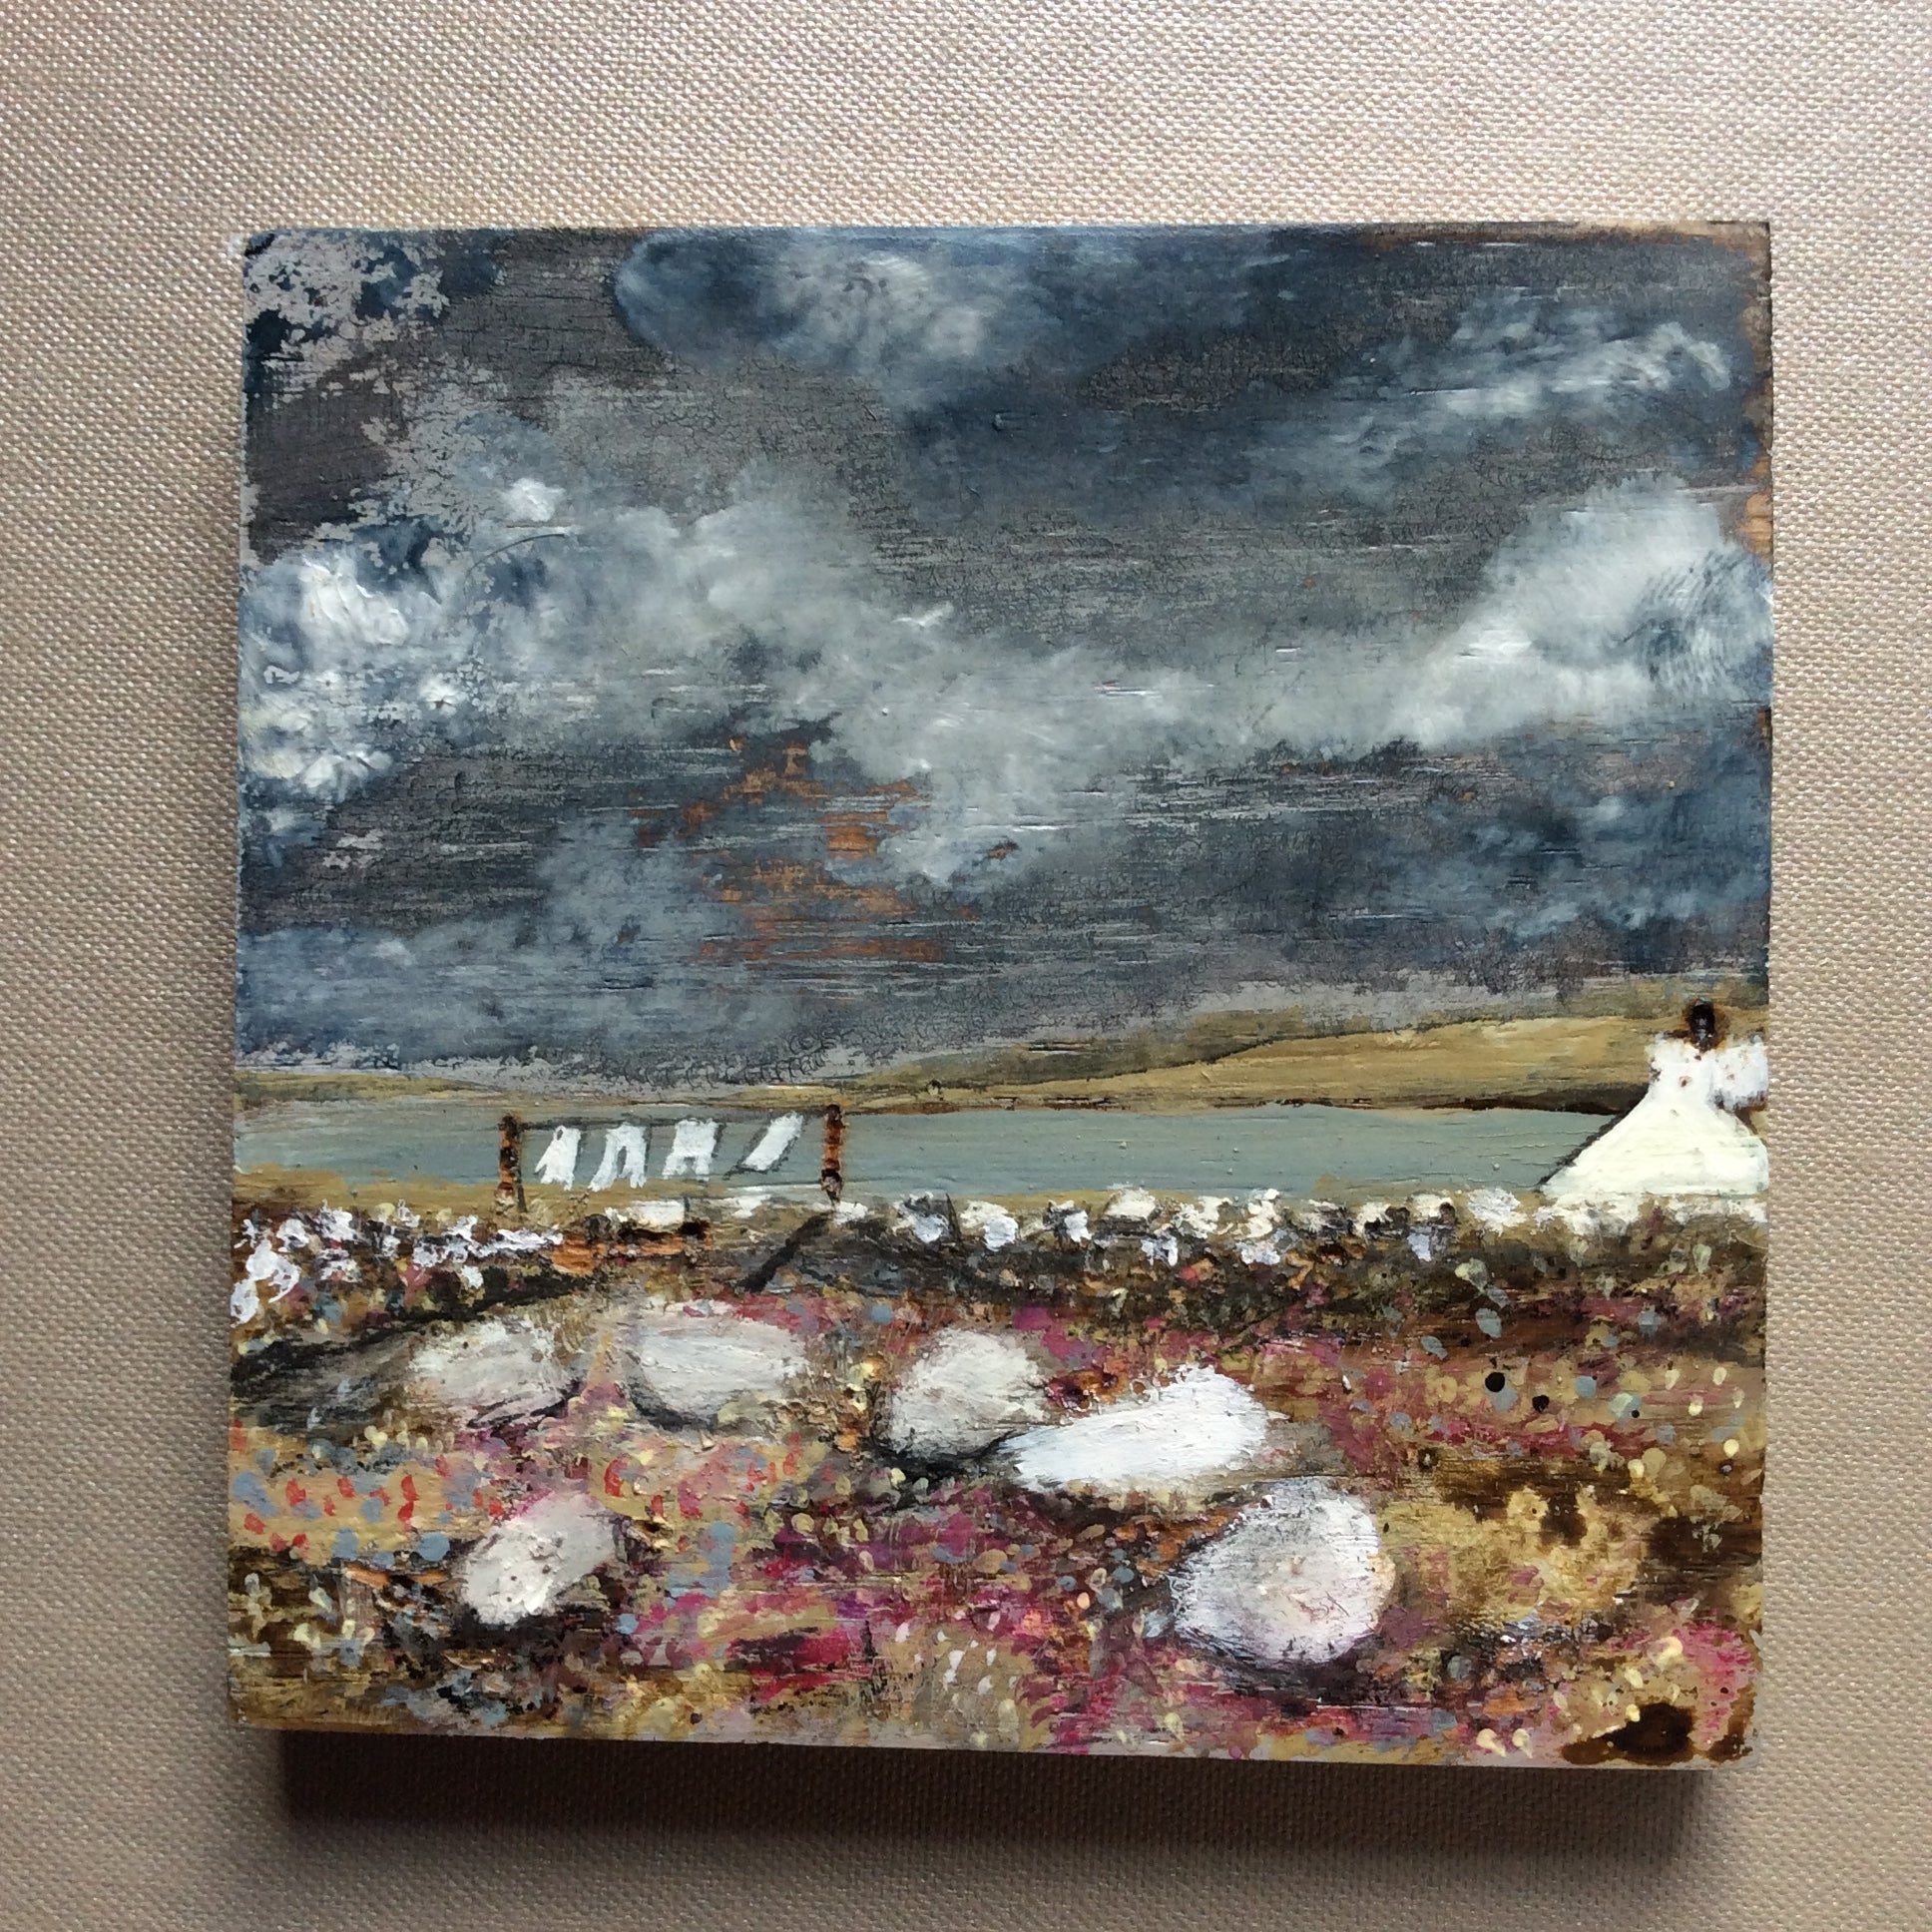 Mixed Media Art on wood By Louise O'Hara - "Caught in a storm”